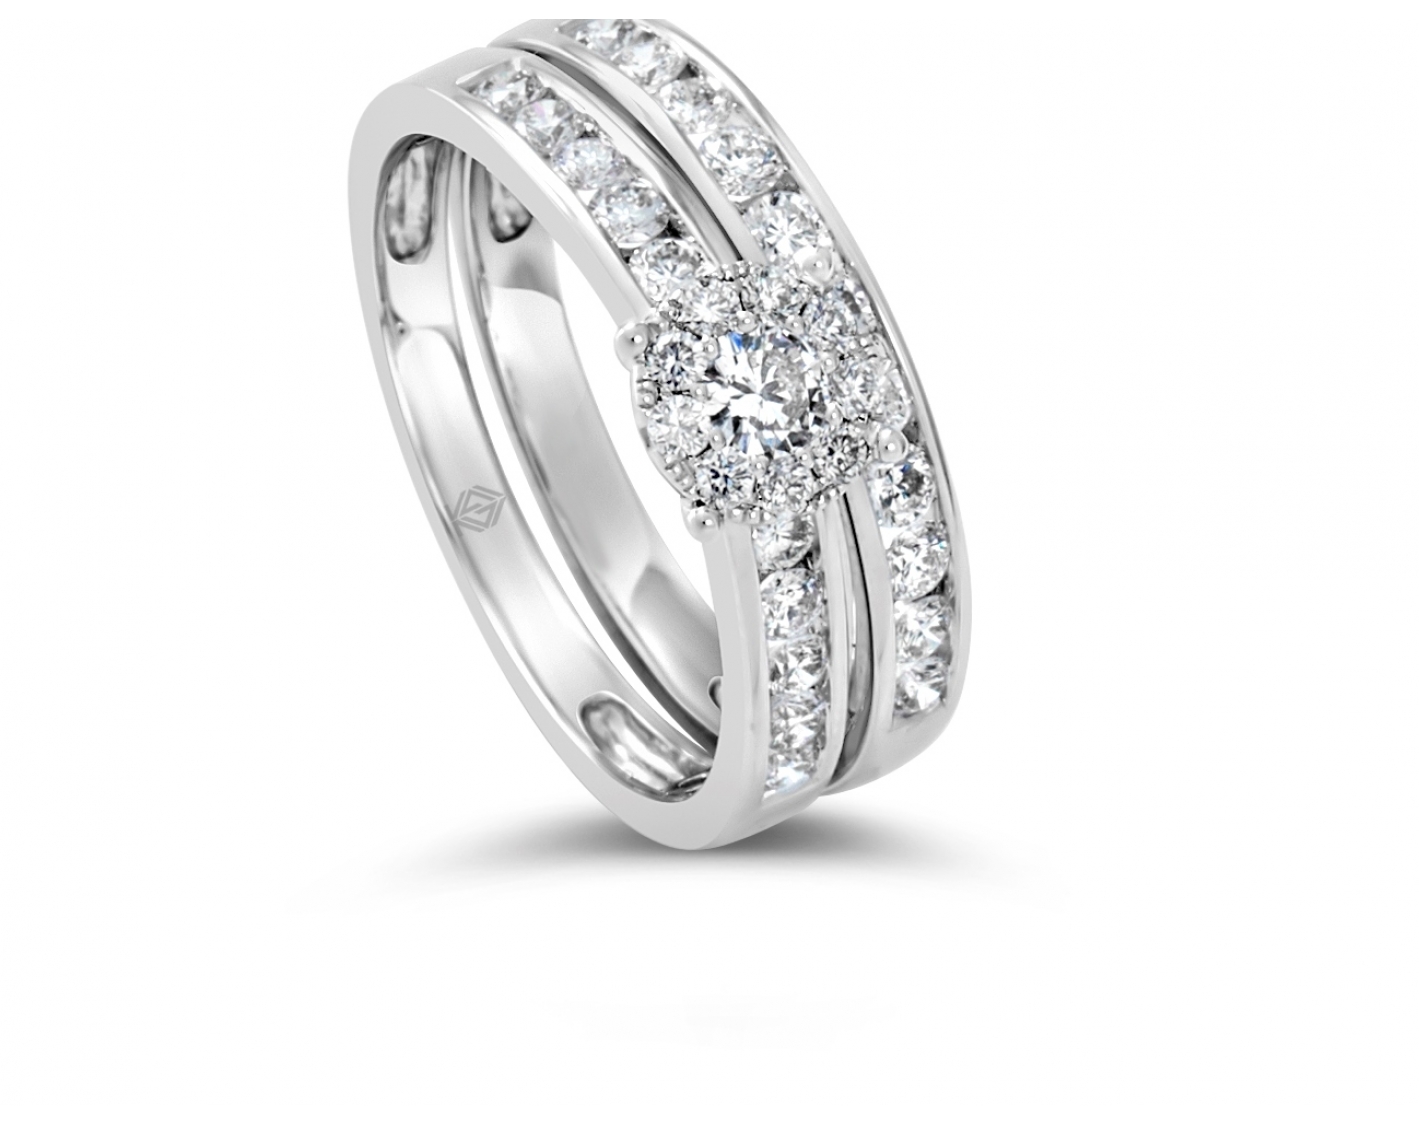 18k white gold halo illusion set engagement ring & matching wedding band in channel set (2 rings)